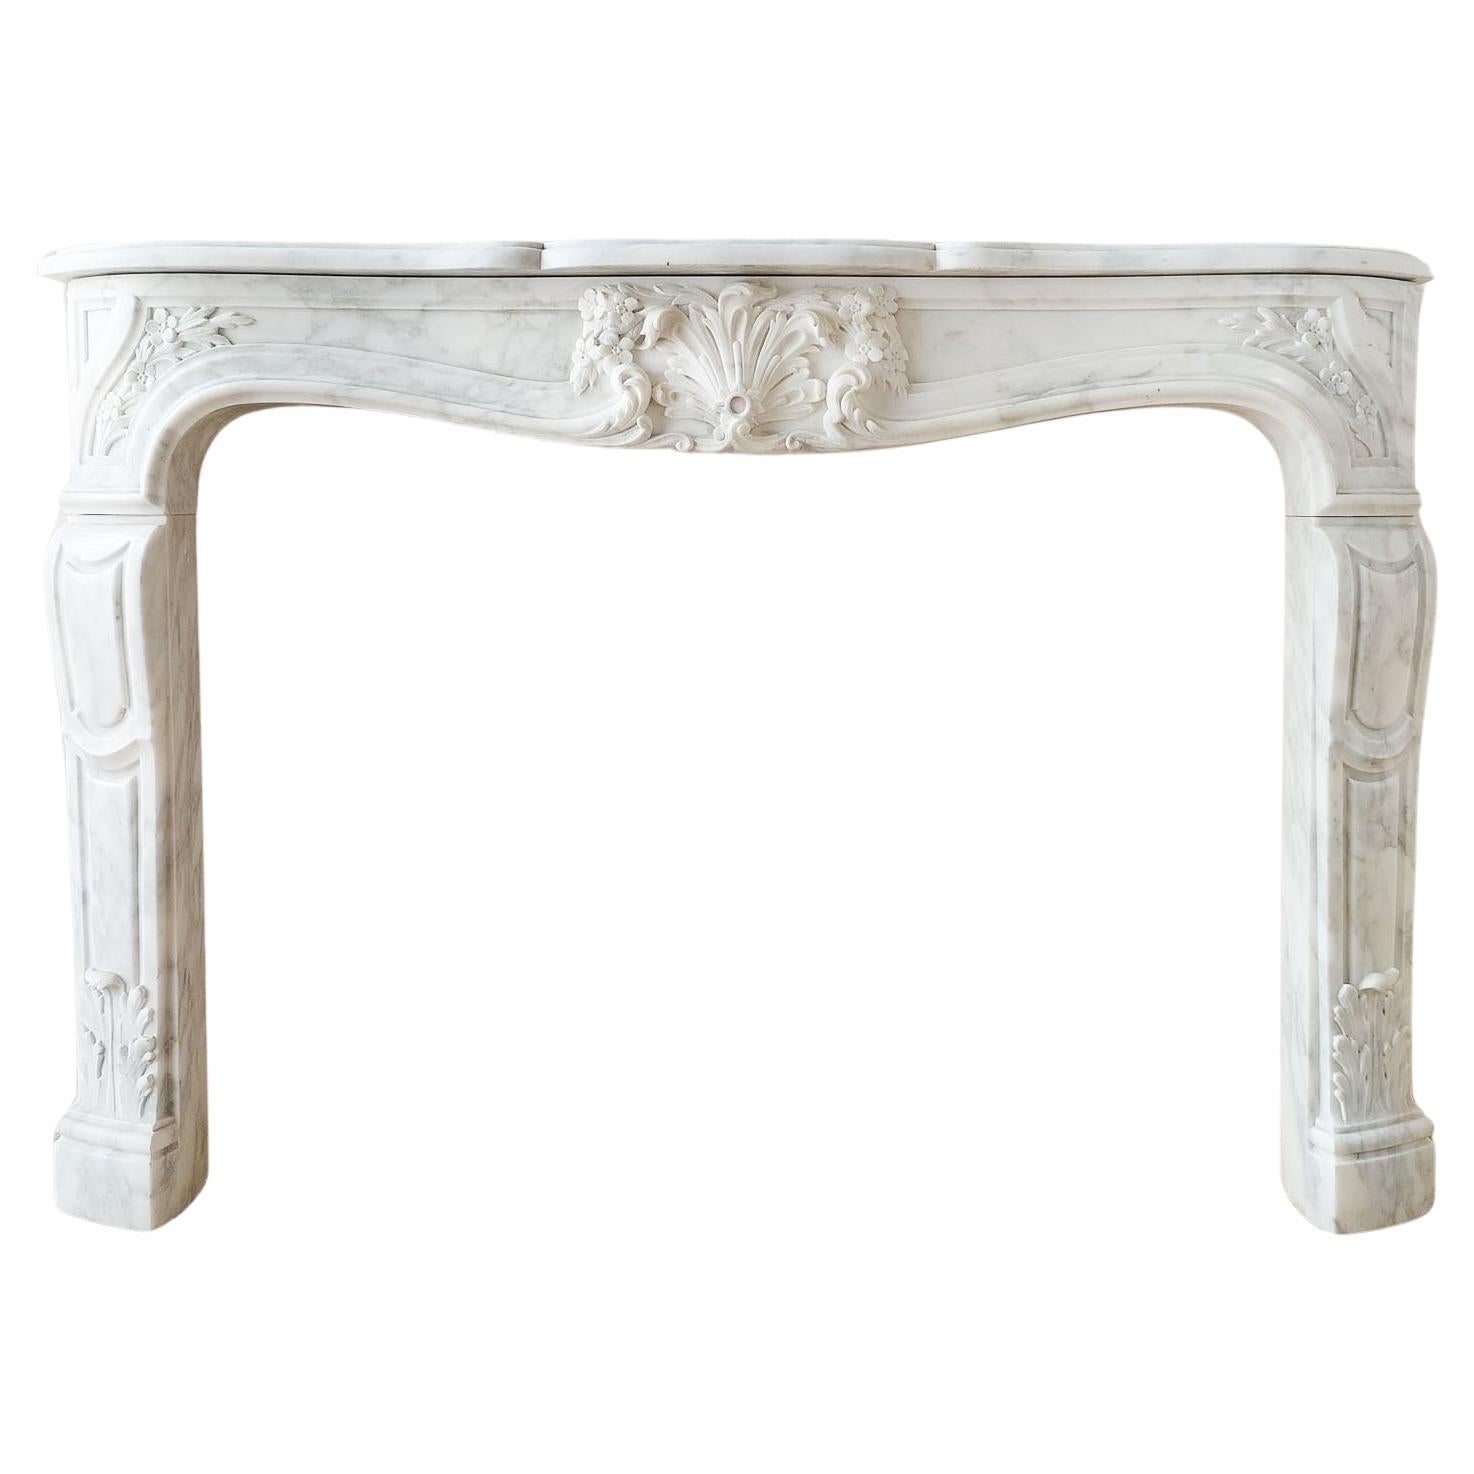 An Antique French Beautifully Carved Carrara Marble Fireplace with Coquille